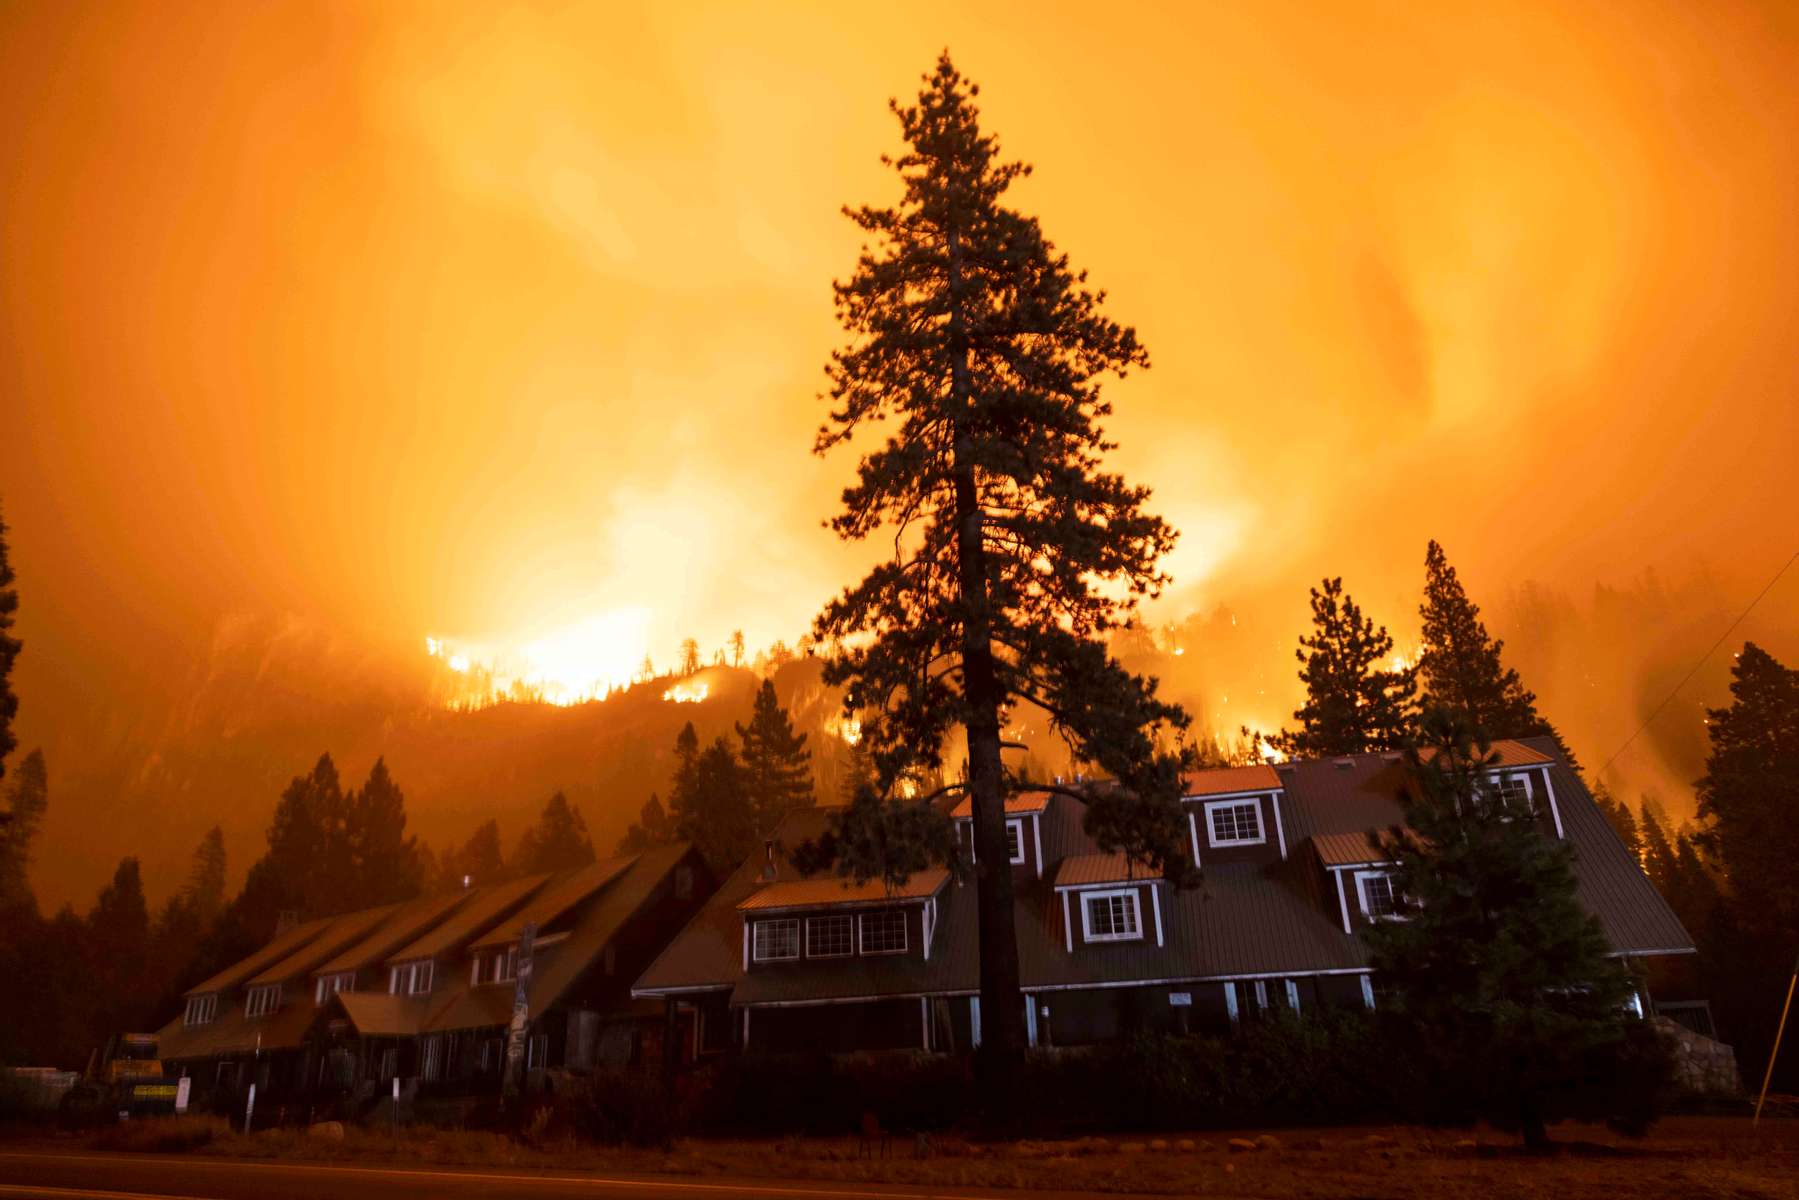 The Strawberry lodge stands as the Caldor fire rages on August 29, 2021, in the Eldorado National forest, California. The Caldor Fire has burned over 165,000 acres, destroyed over 660 structures and is currently 14 percent contained. 